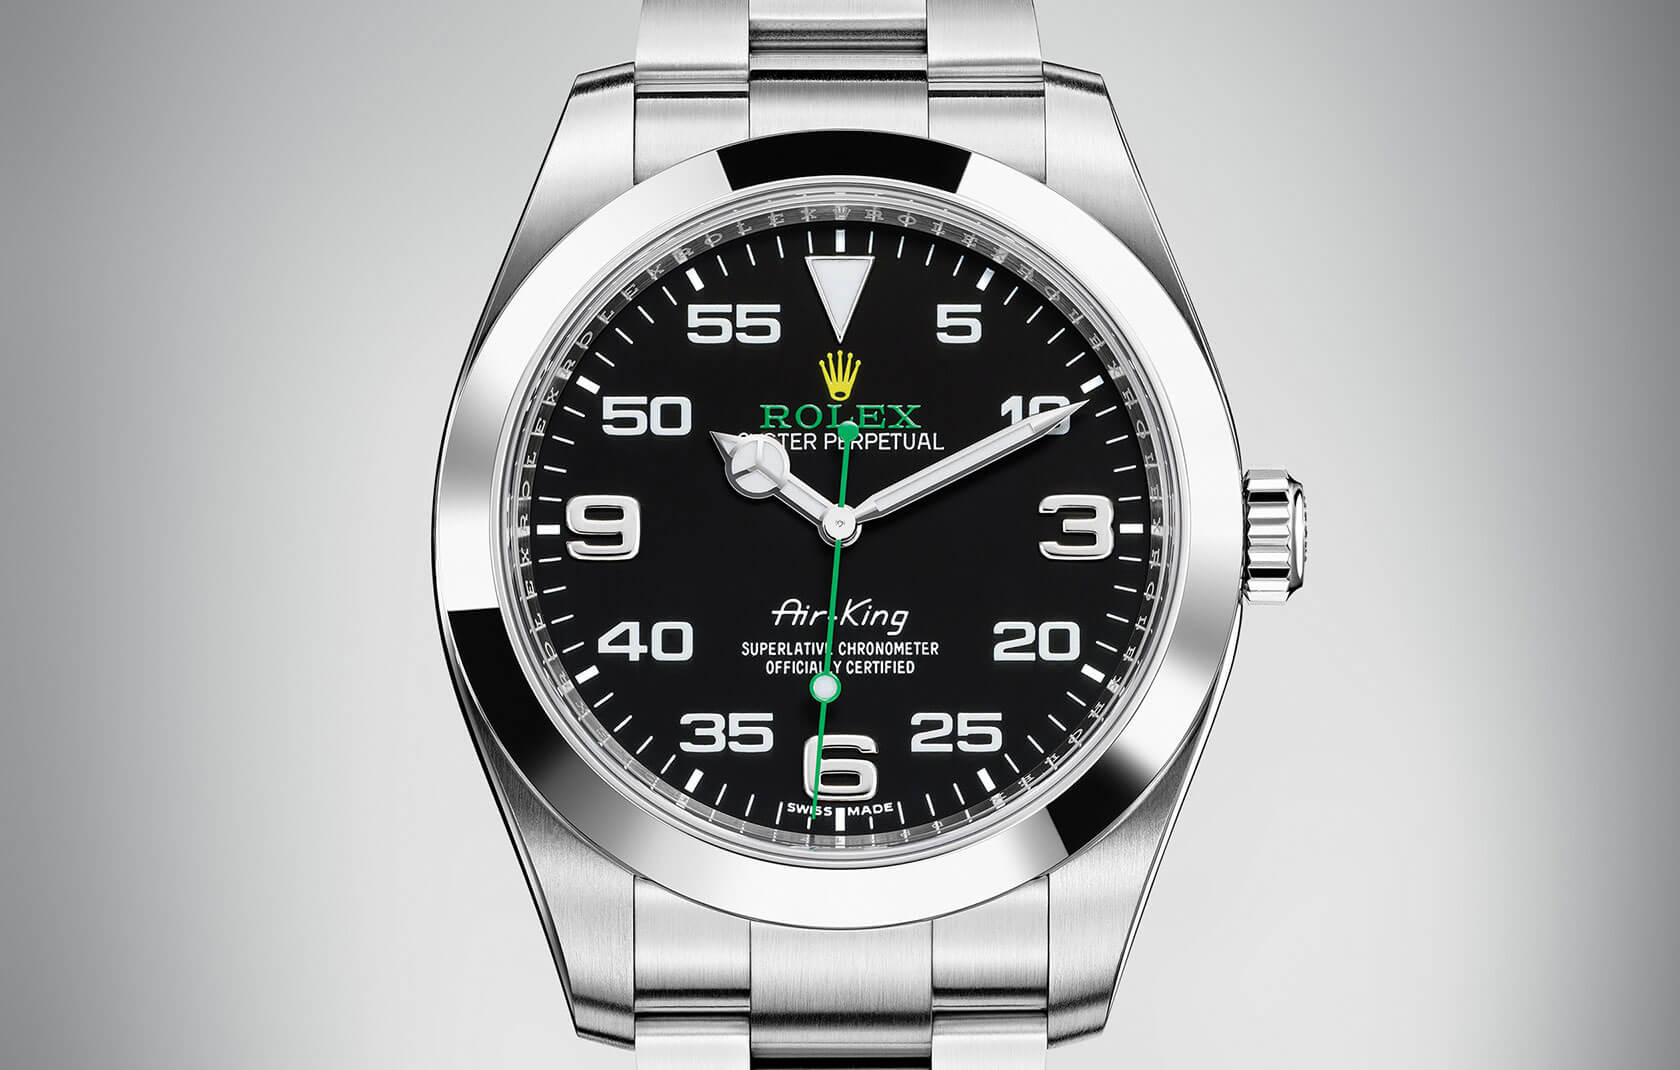 New 2016 model range for Rolex announced today ...